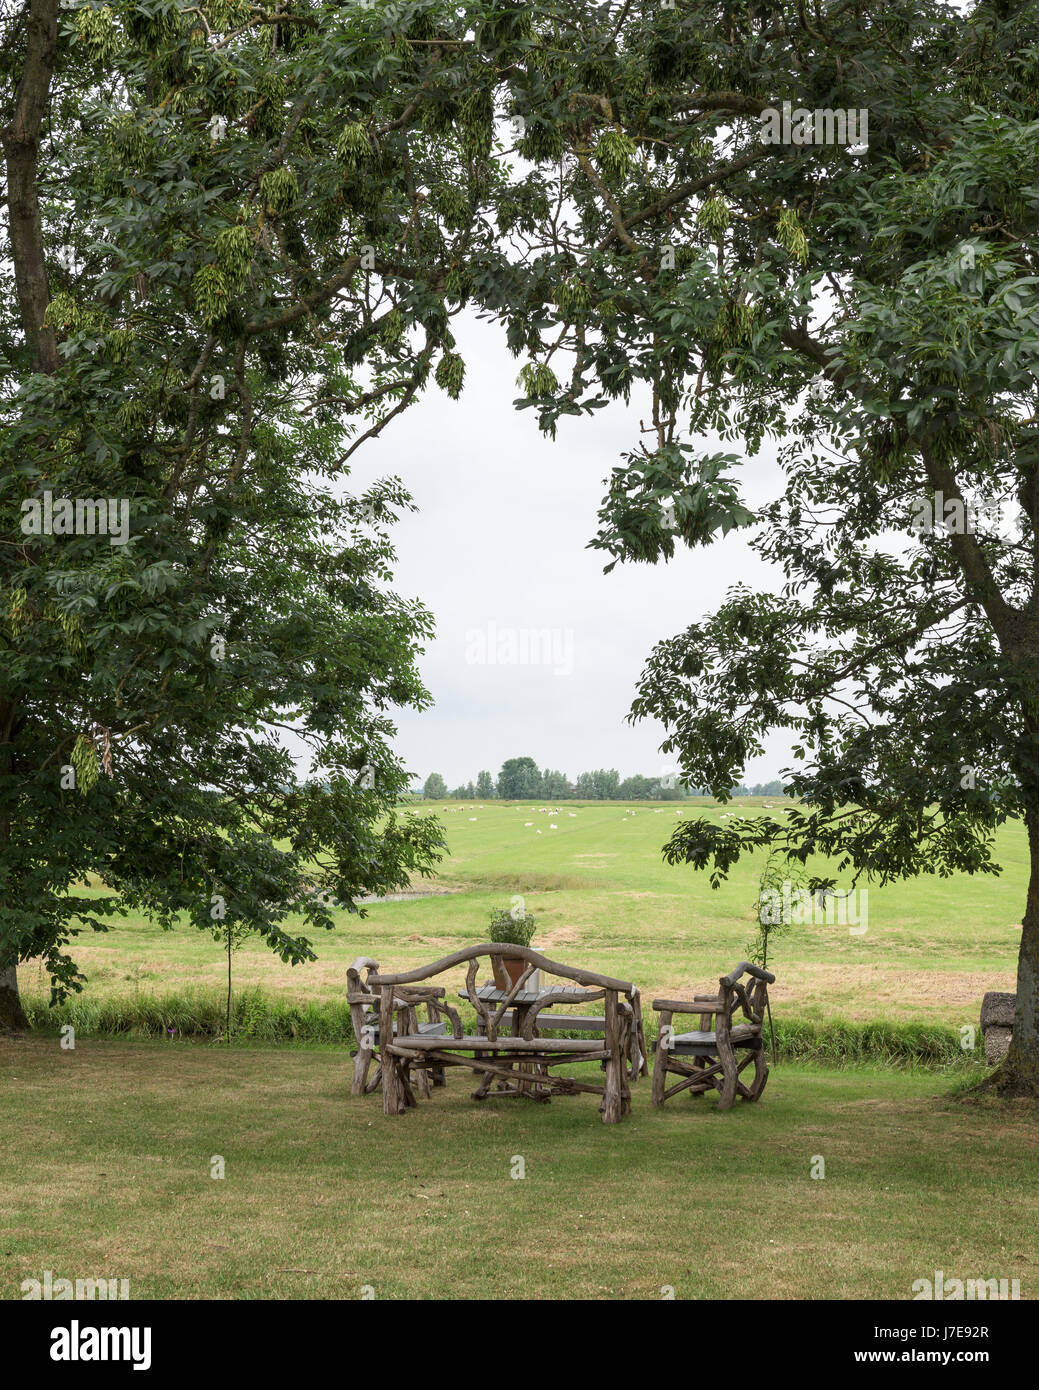 Wooden bench and table in rural countryside of Northern Germany Stock Photo